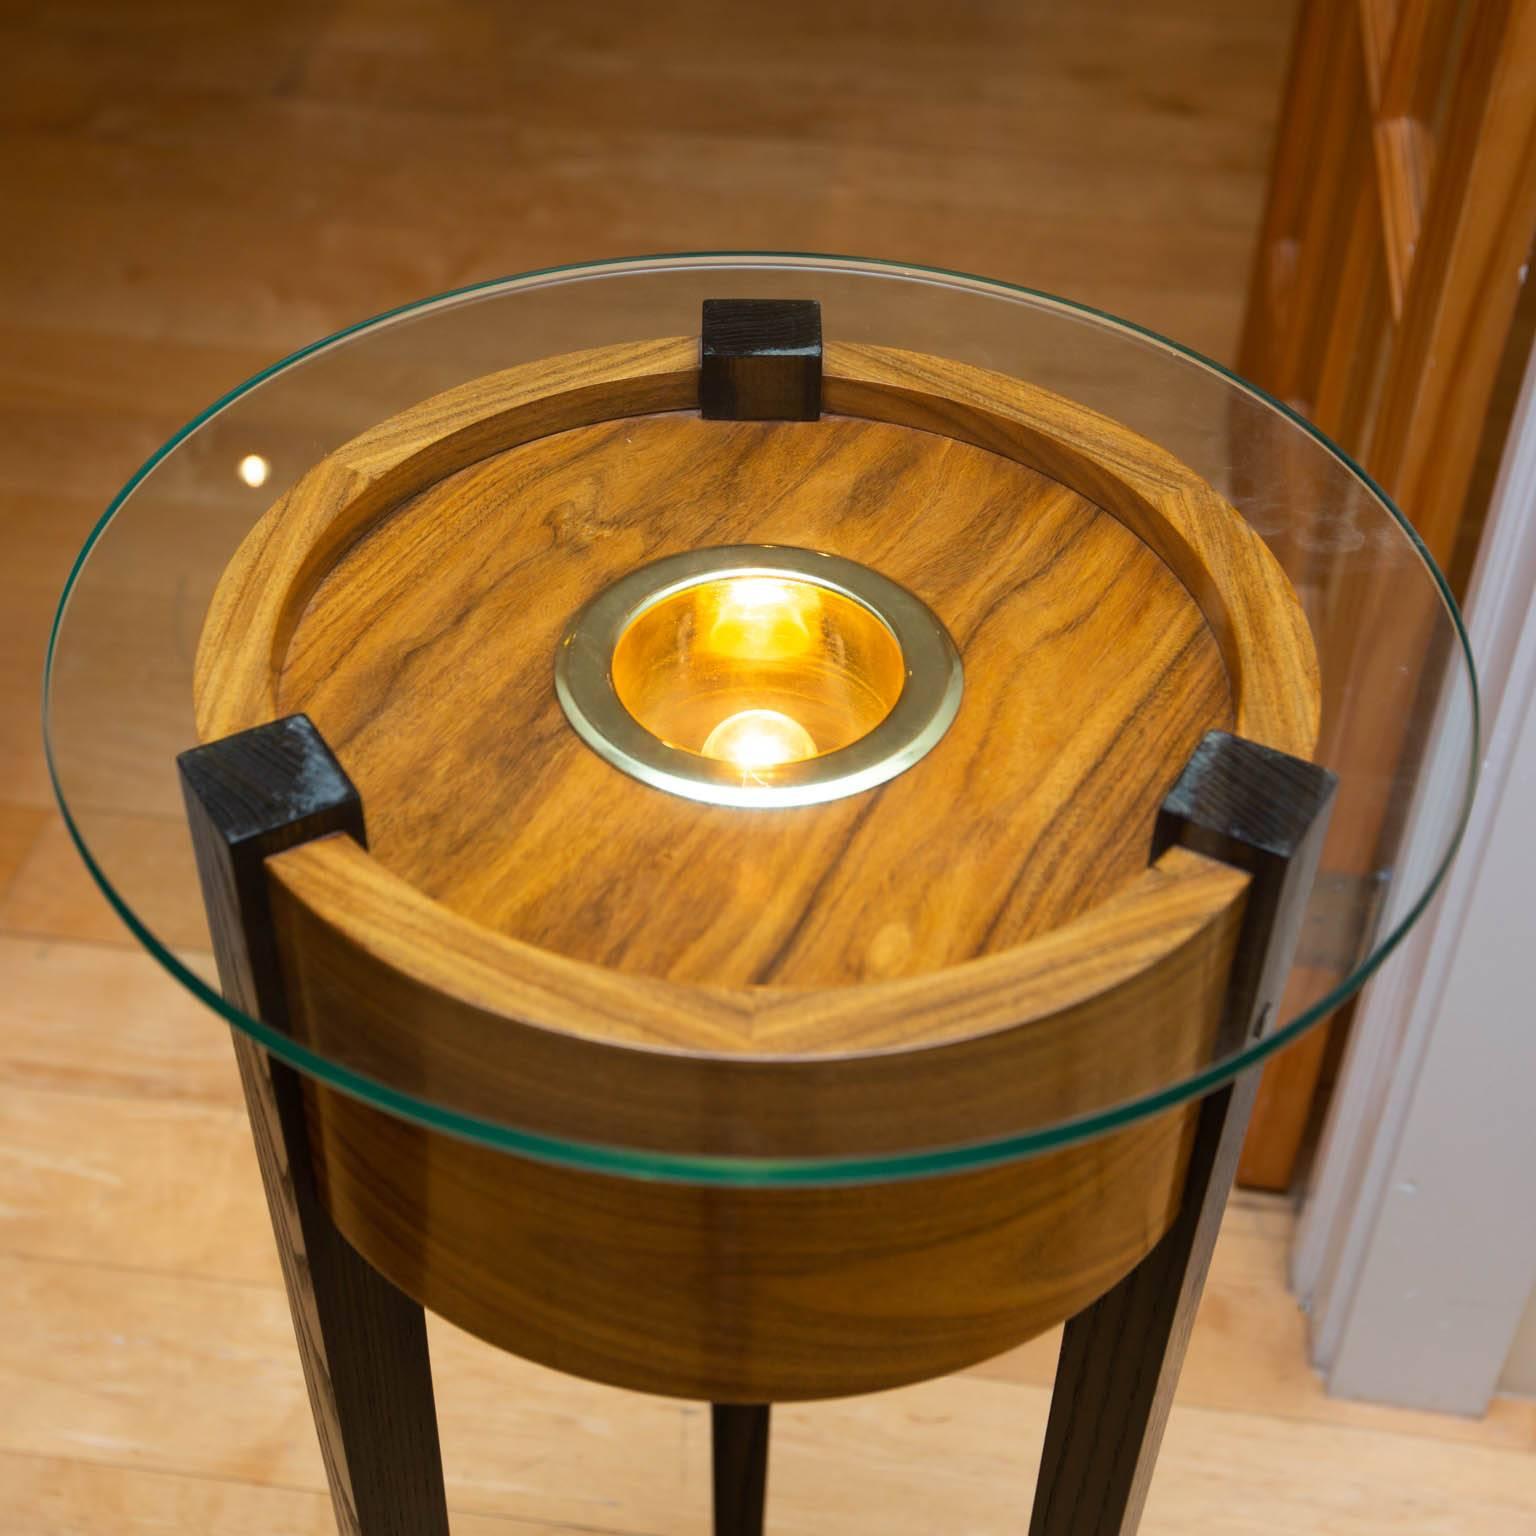 Bolivian rosewood with ebonized legs featuring an integrated LED light.